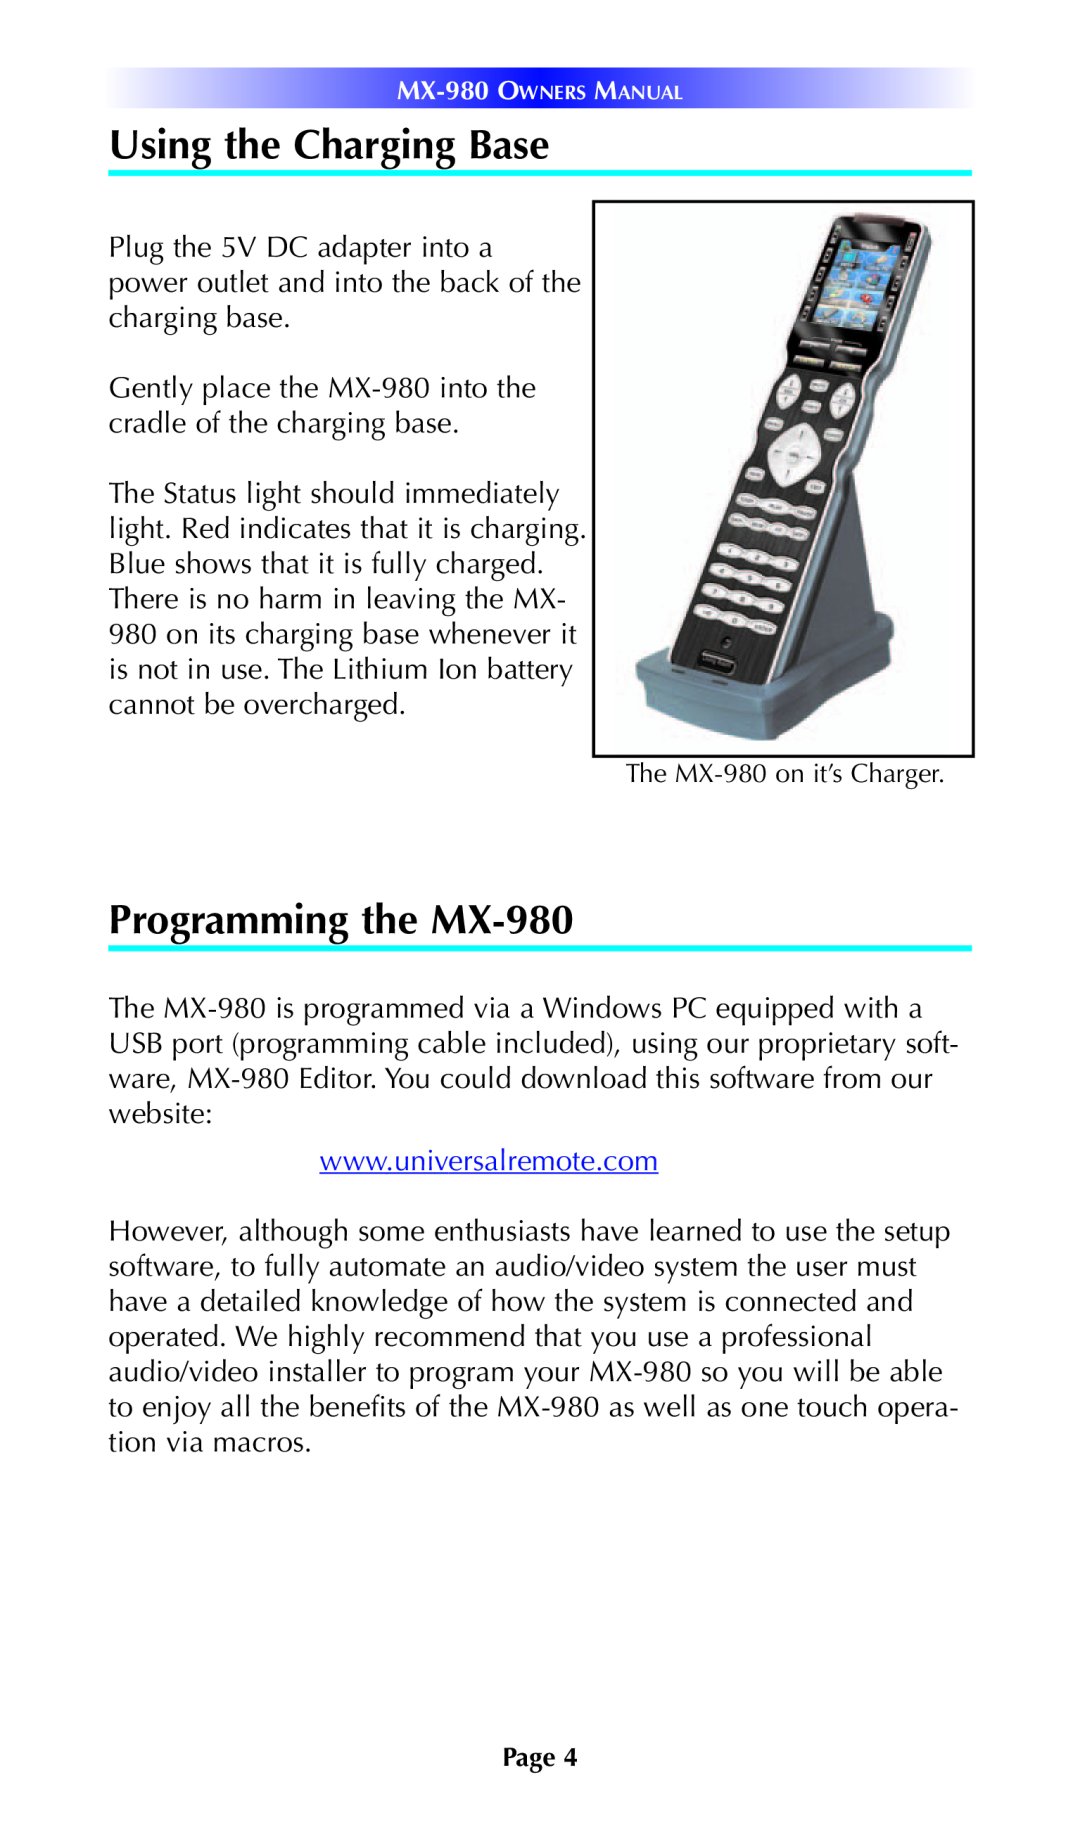 Universal Remote Control manual Using the Charging Base, Programming the MX-980 